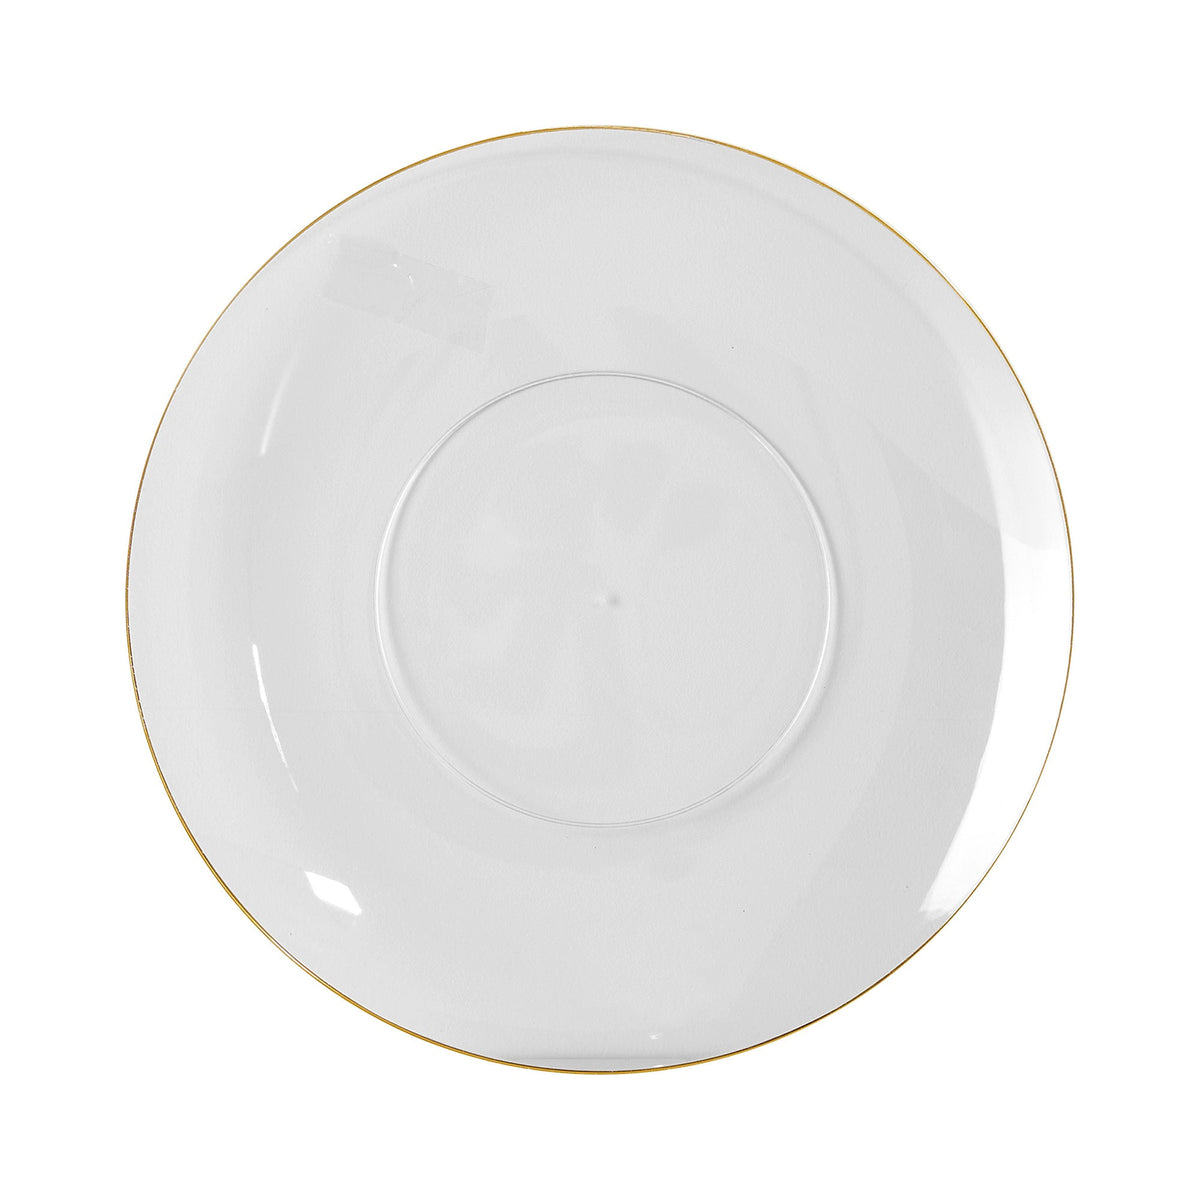 MADISON IMPORTS Disposable-Plasticware Premium Quality Round Clear Plates with Gold Rim, 10 Inches, 10 Count 775310996175